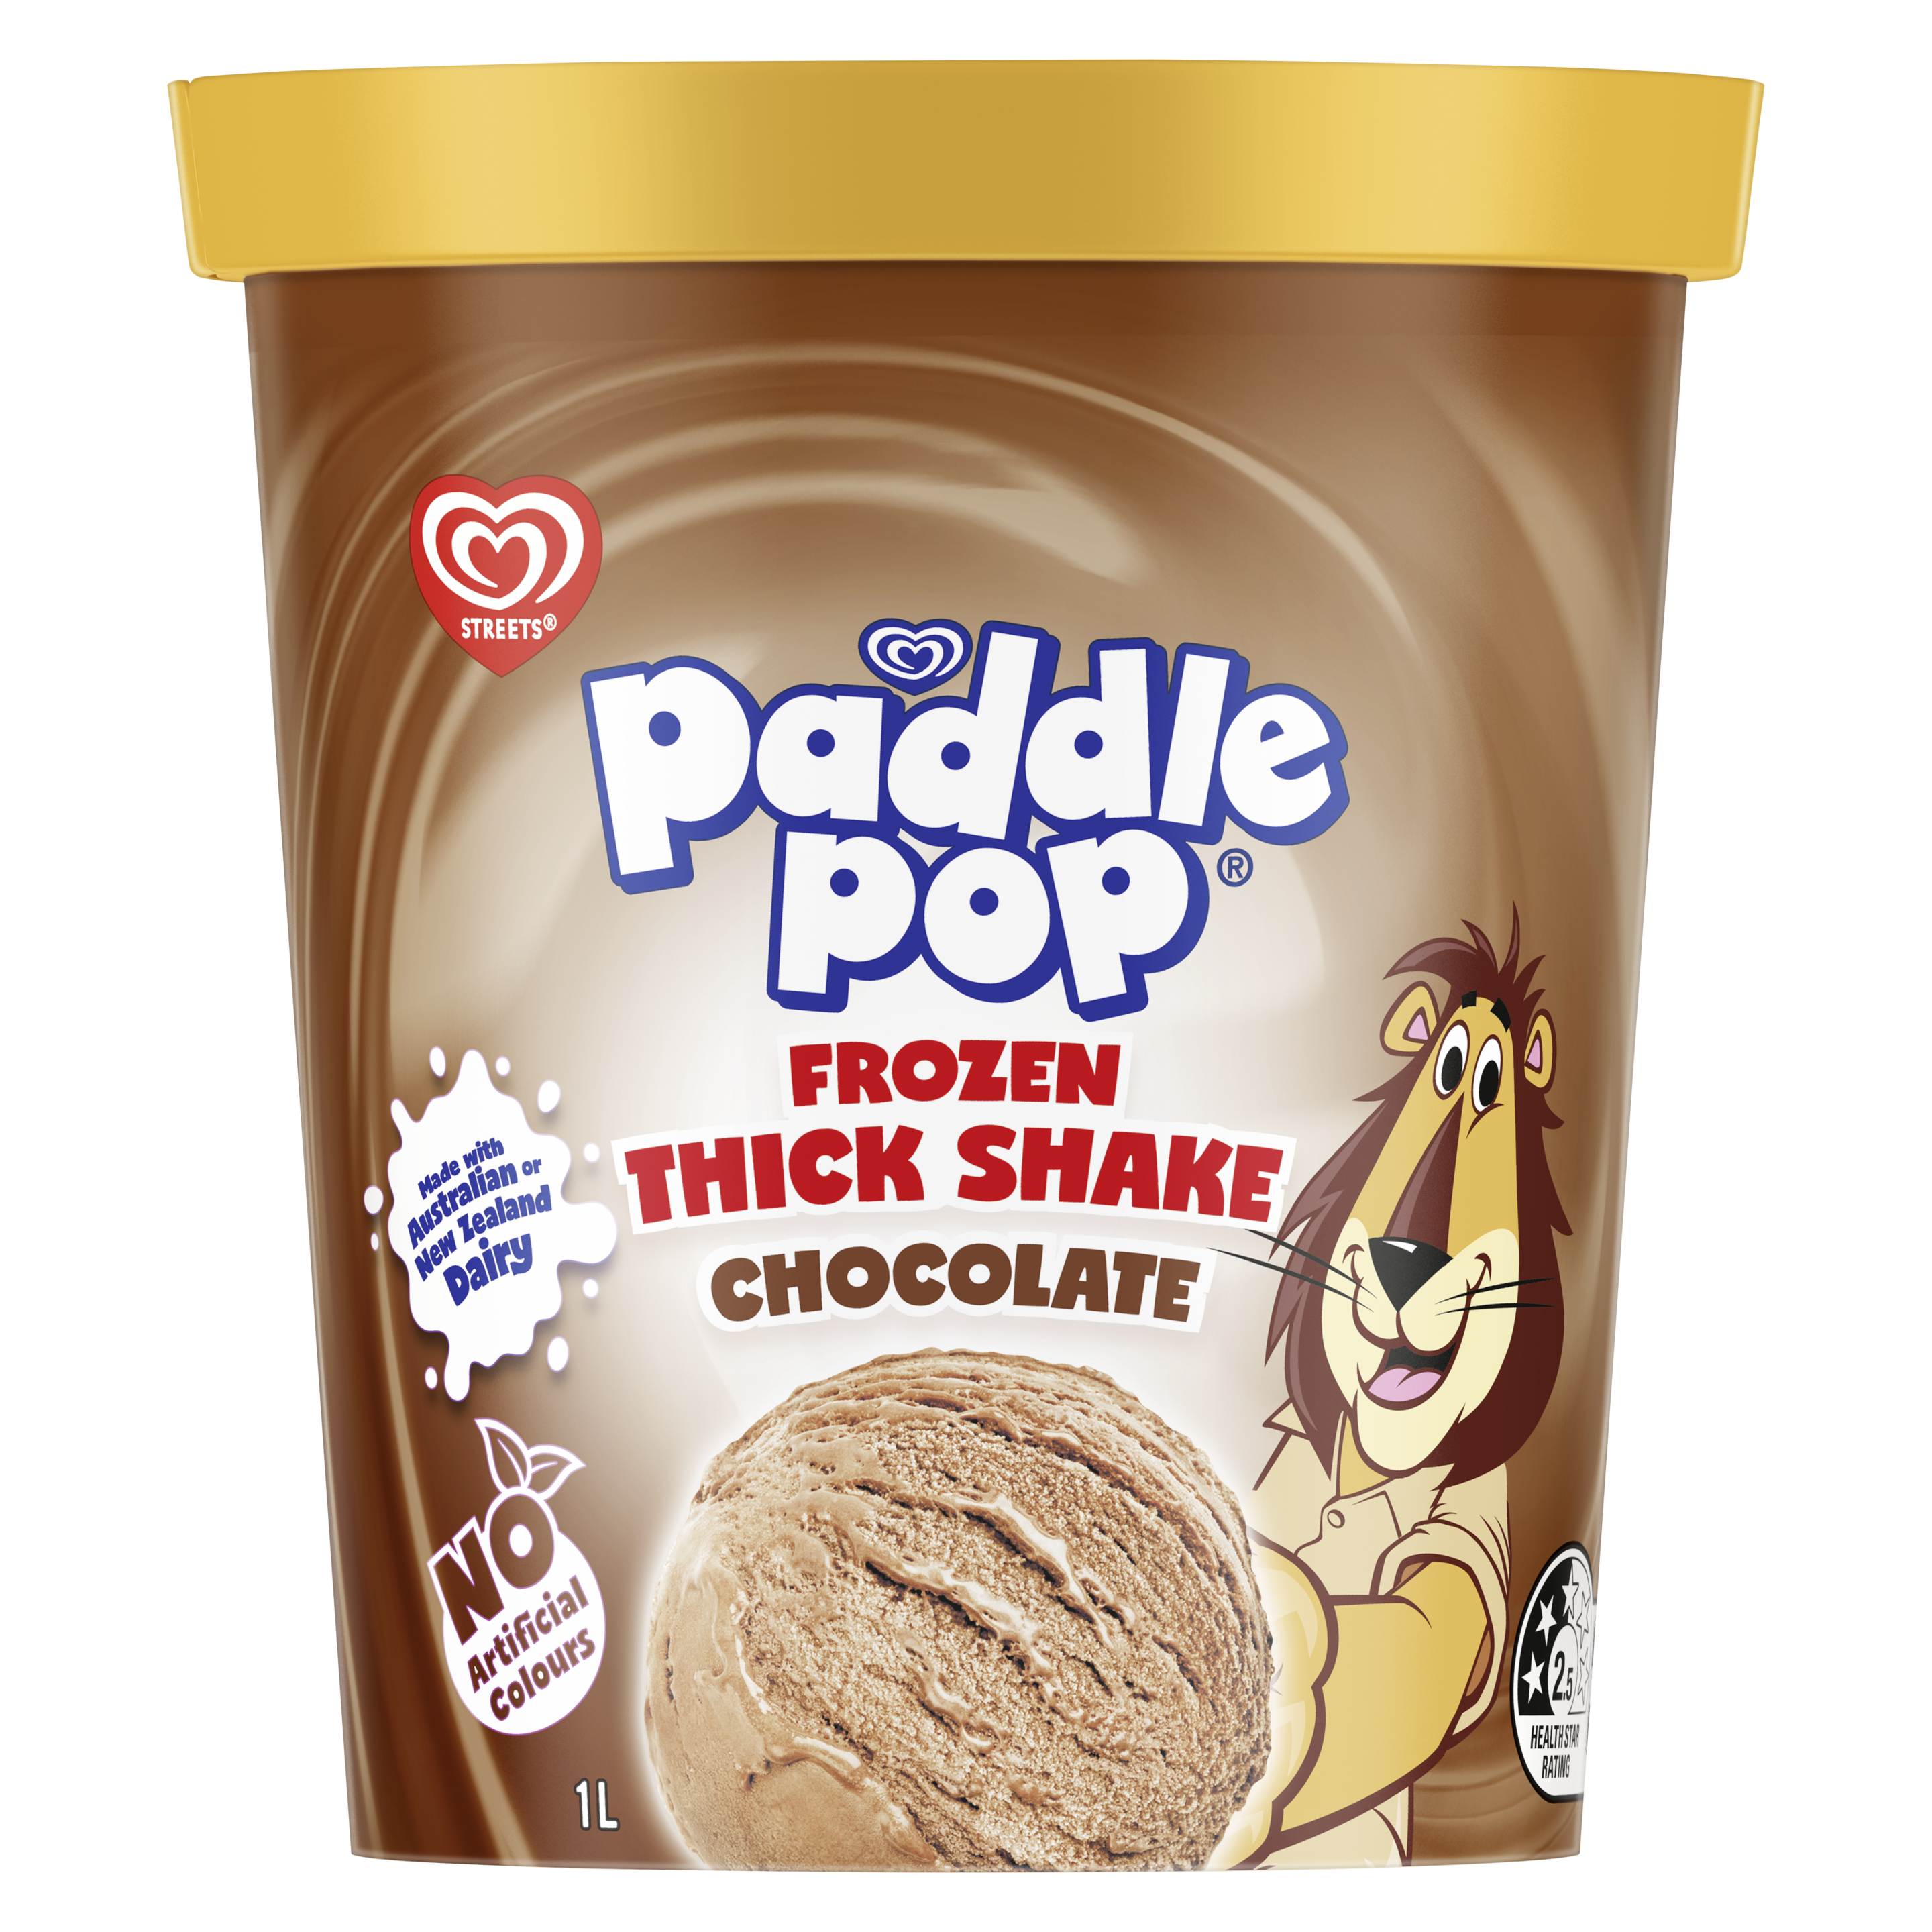 Streets Paddle Pop Frozen Chocolate Thick Shake